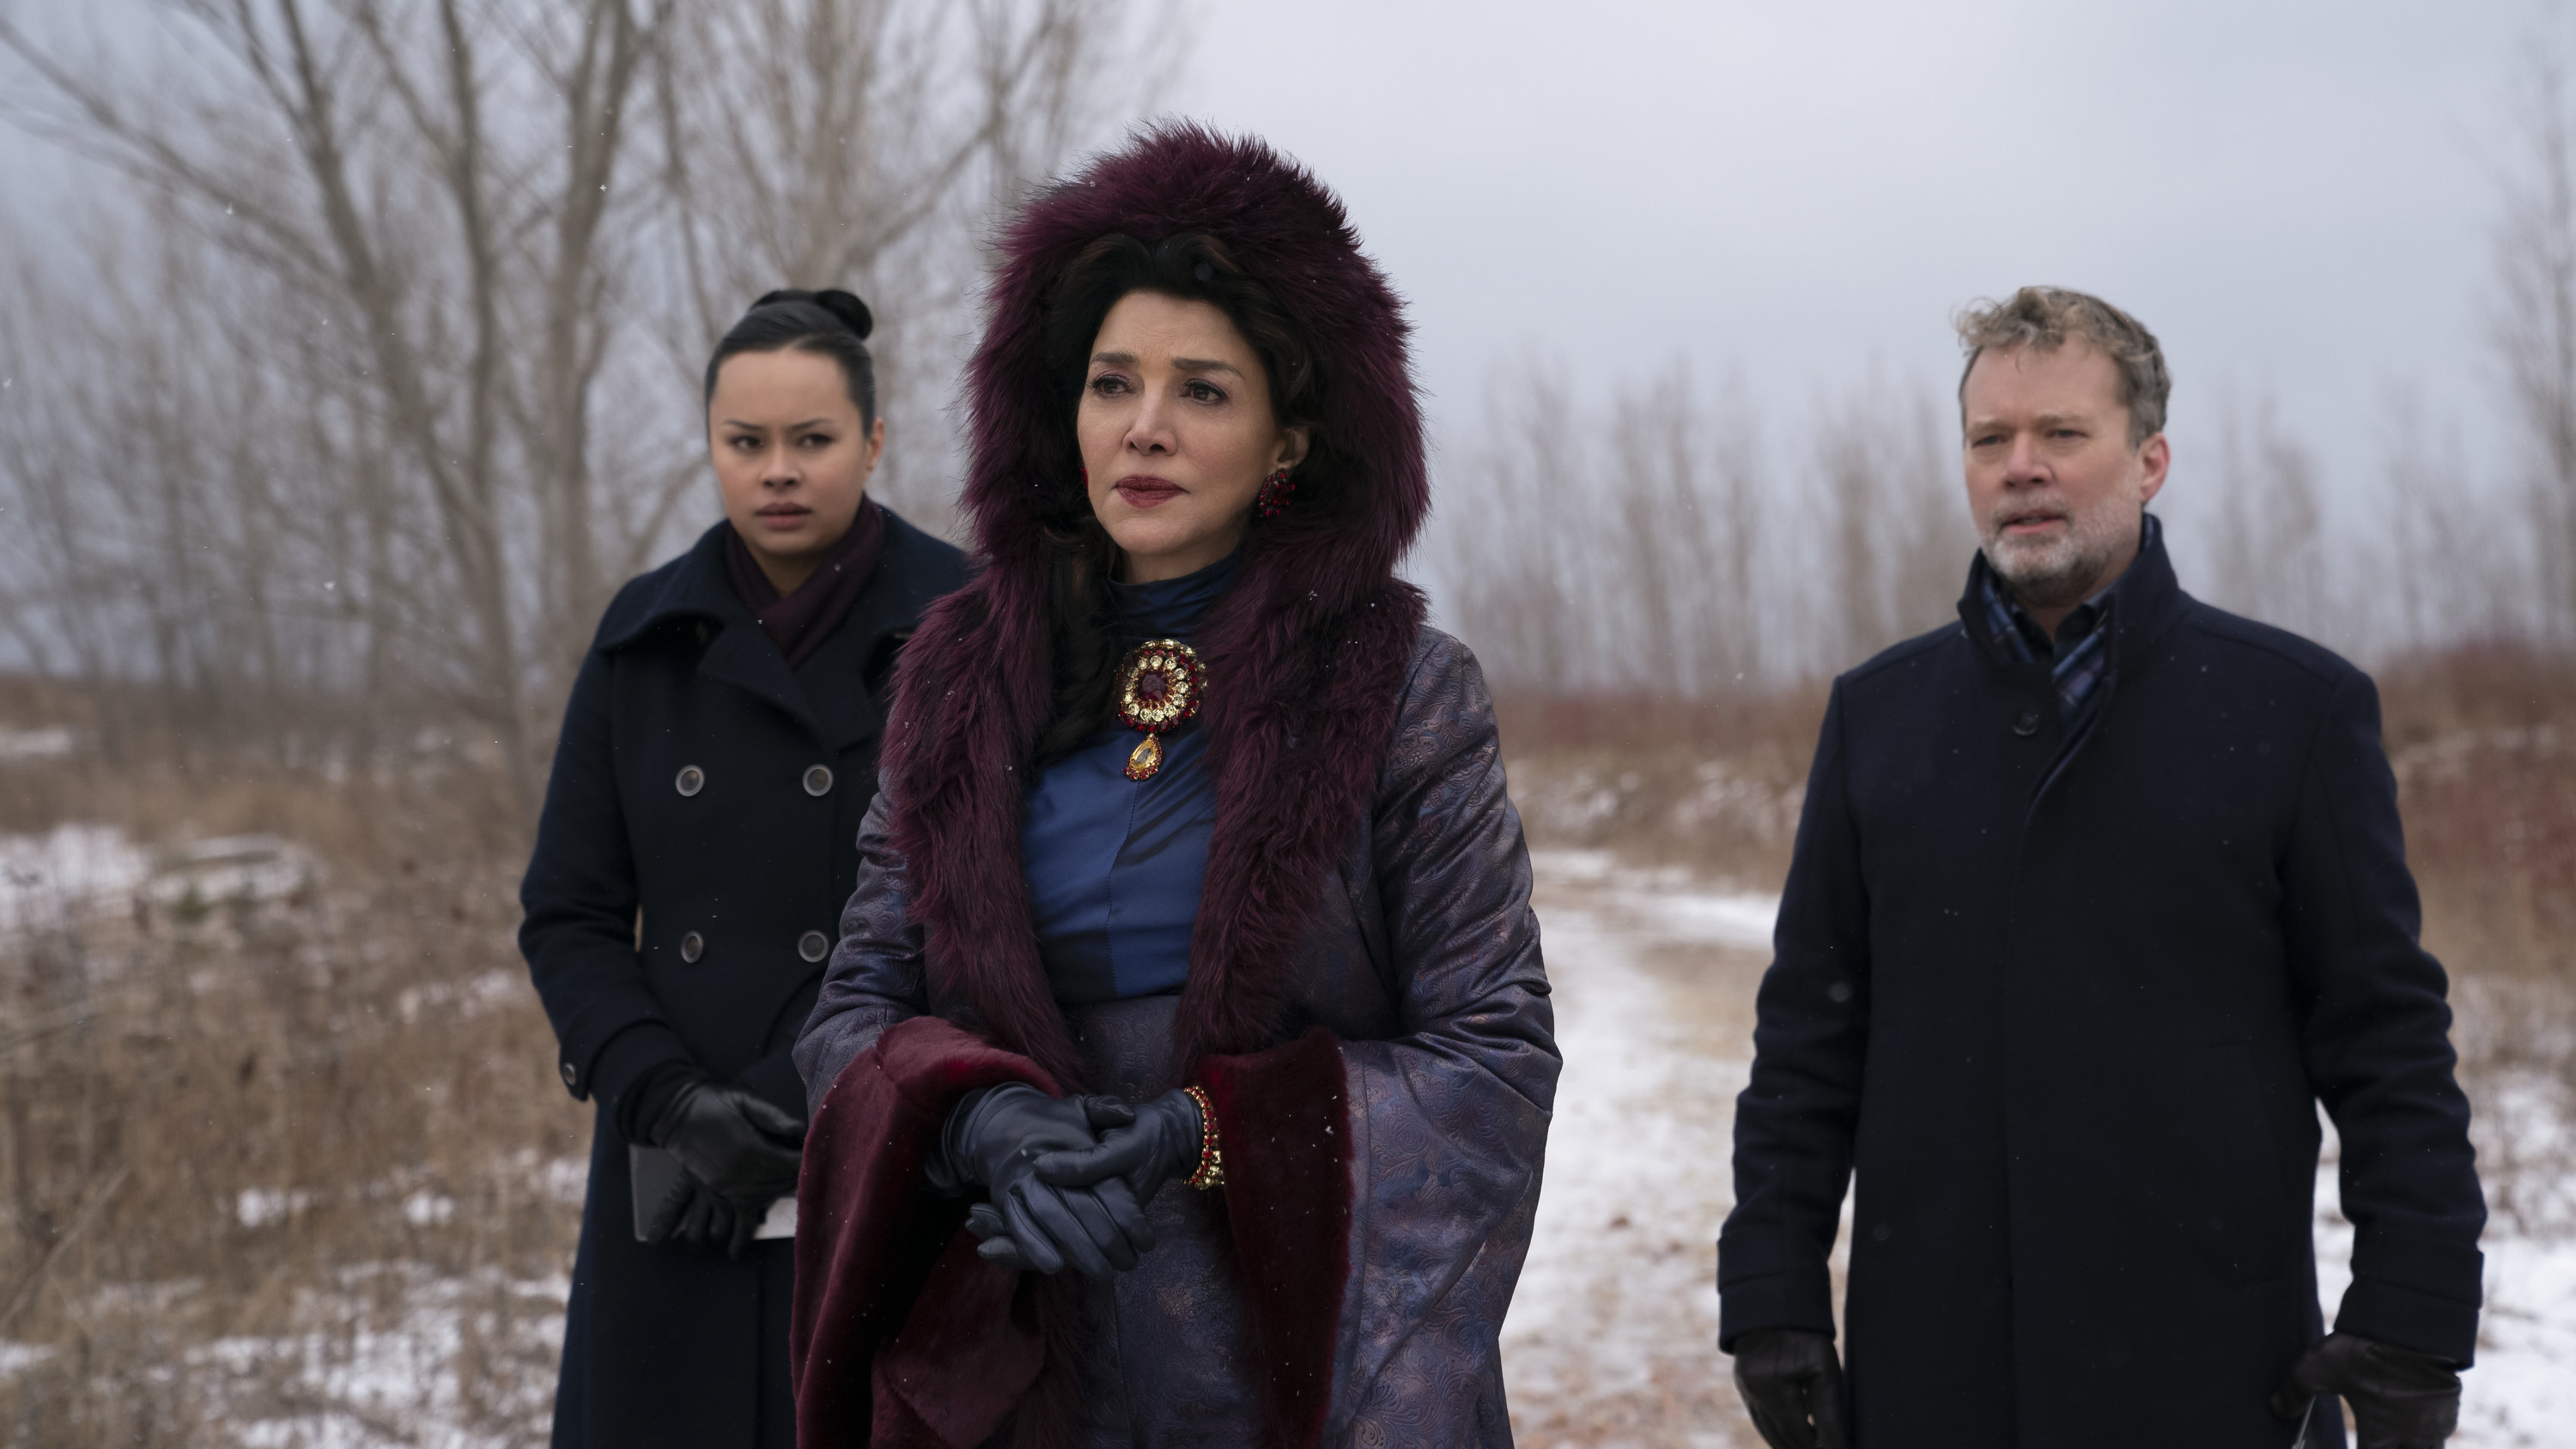 Actor Shohreh Aghdashloo in a still from the series The Expanse